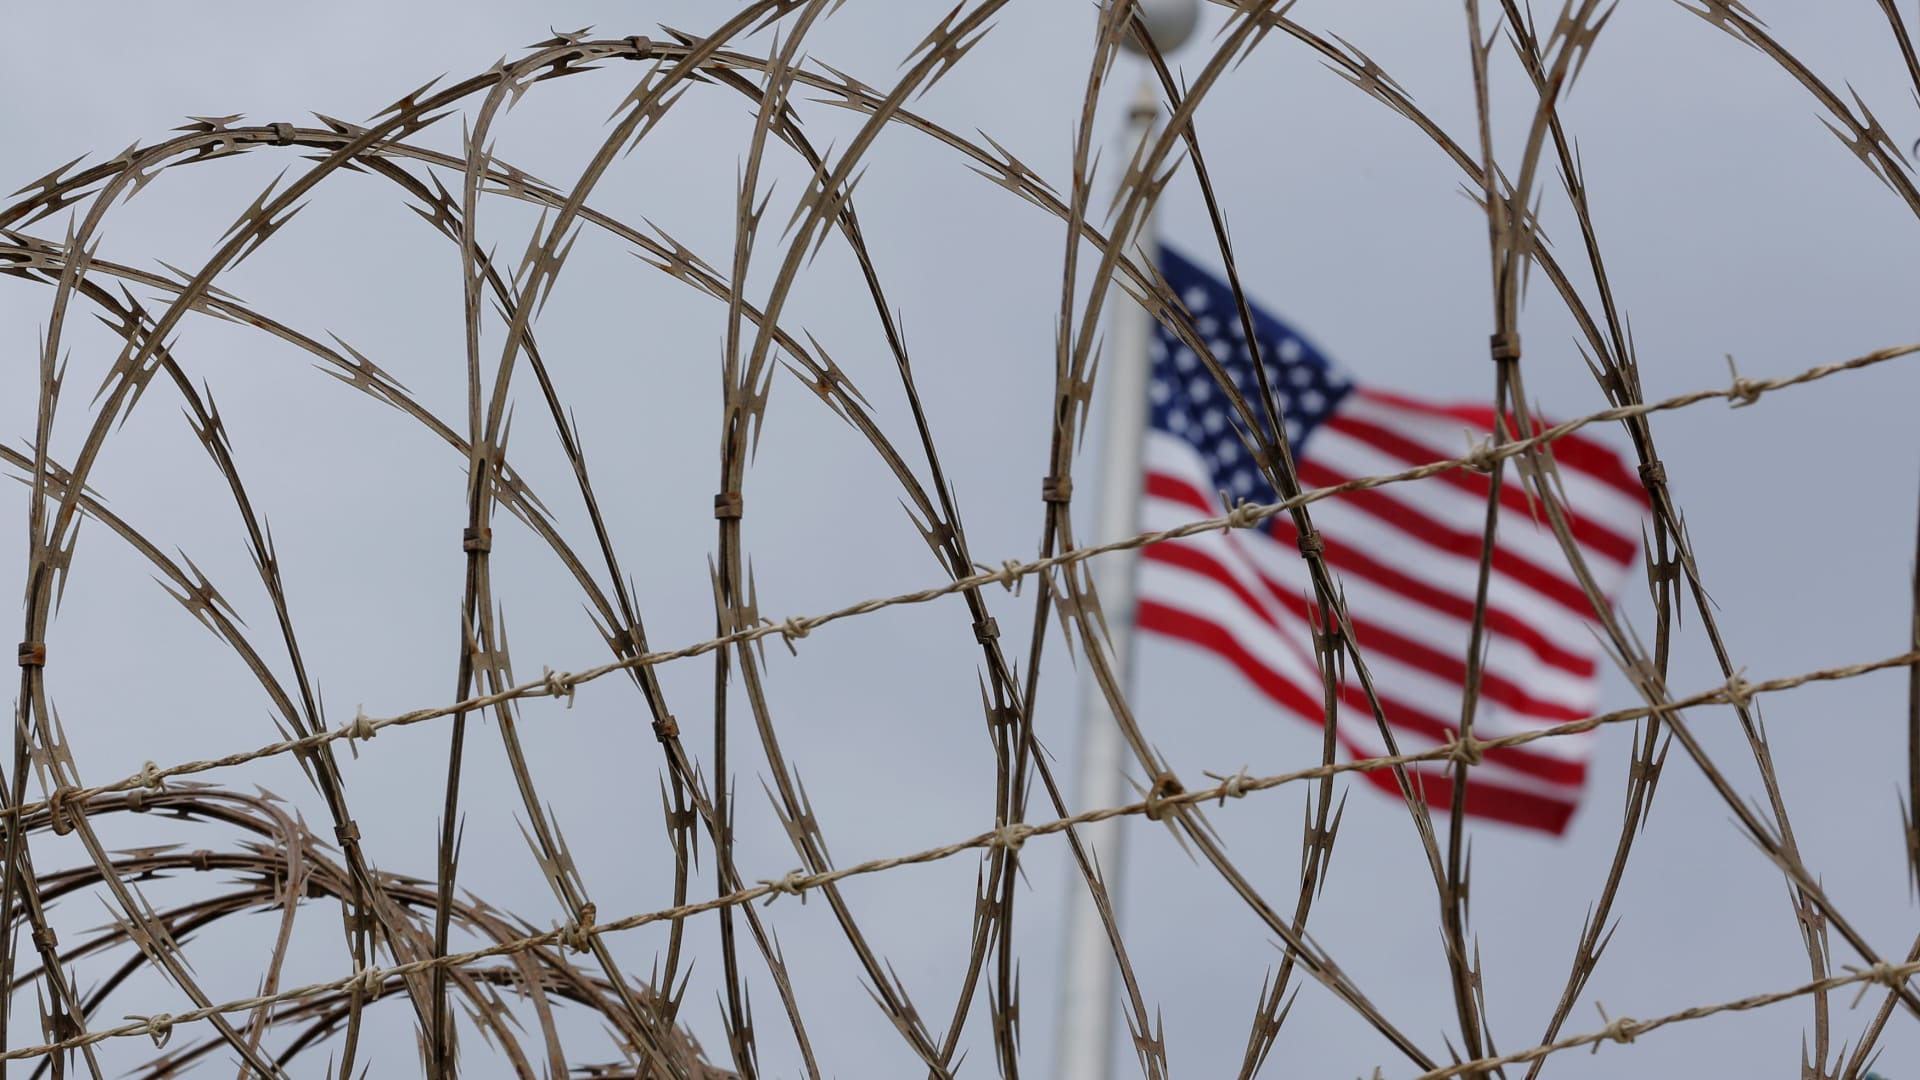 The United States flag flies inside of Joint Task Force Guantanamo Camp VI at the U.S. naval base in Guantanamo Bay, Cuba, March 22, 2016.